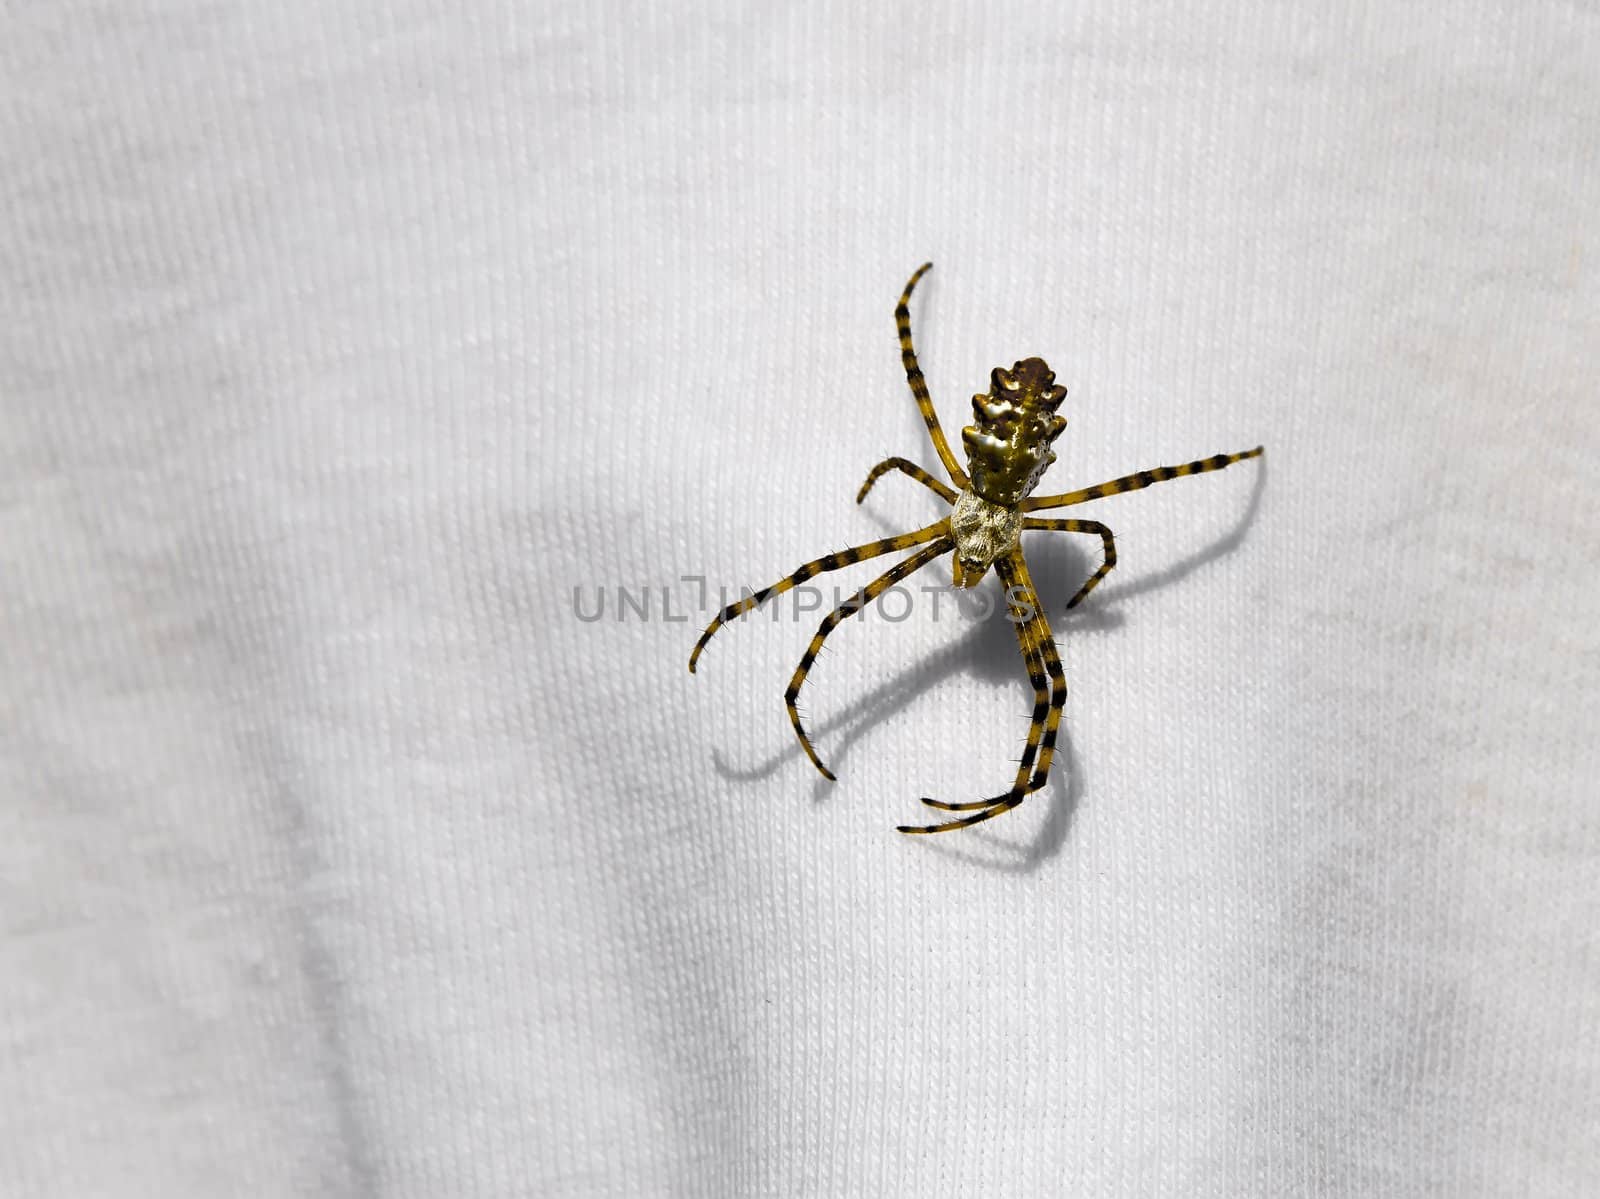 Spider sits on the fabric in sunlight